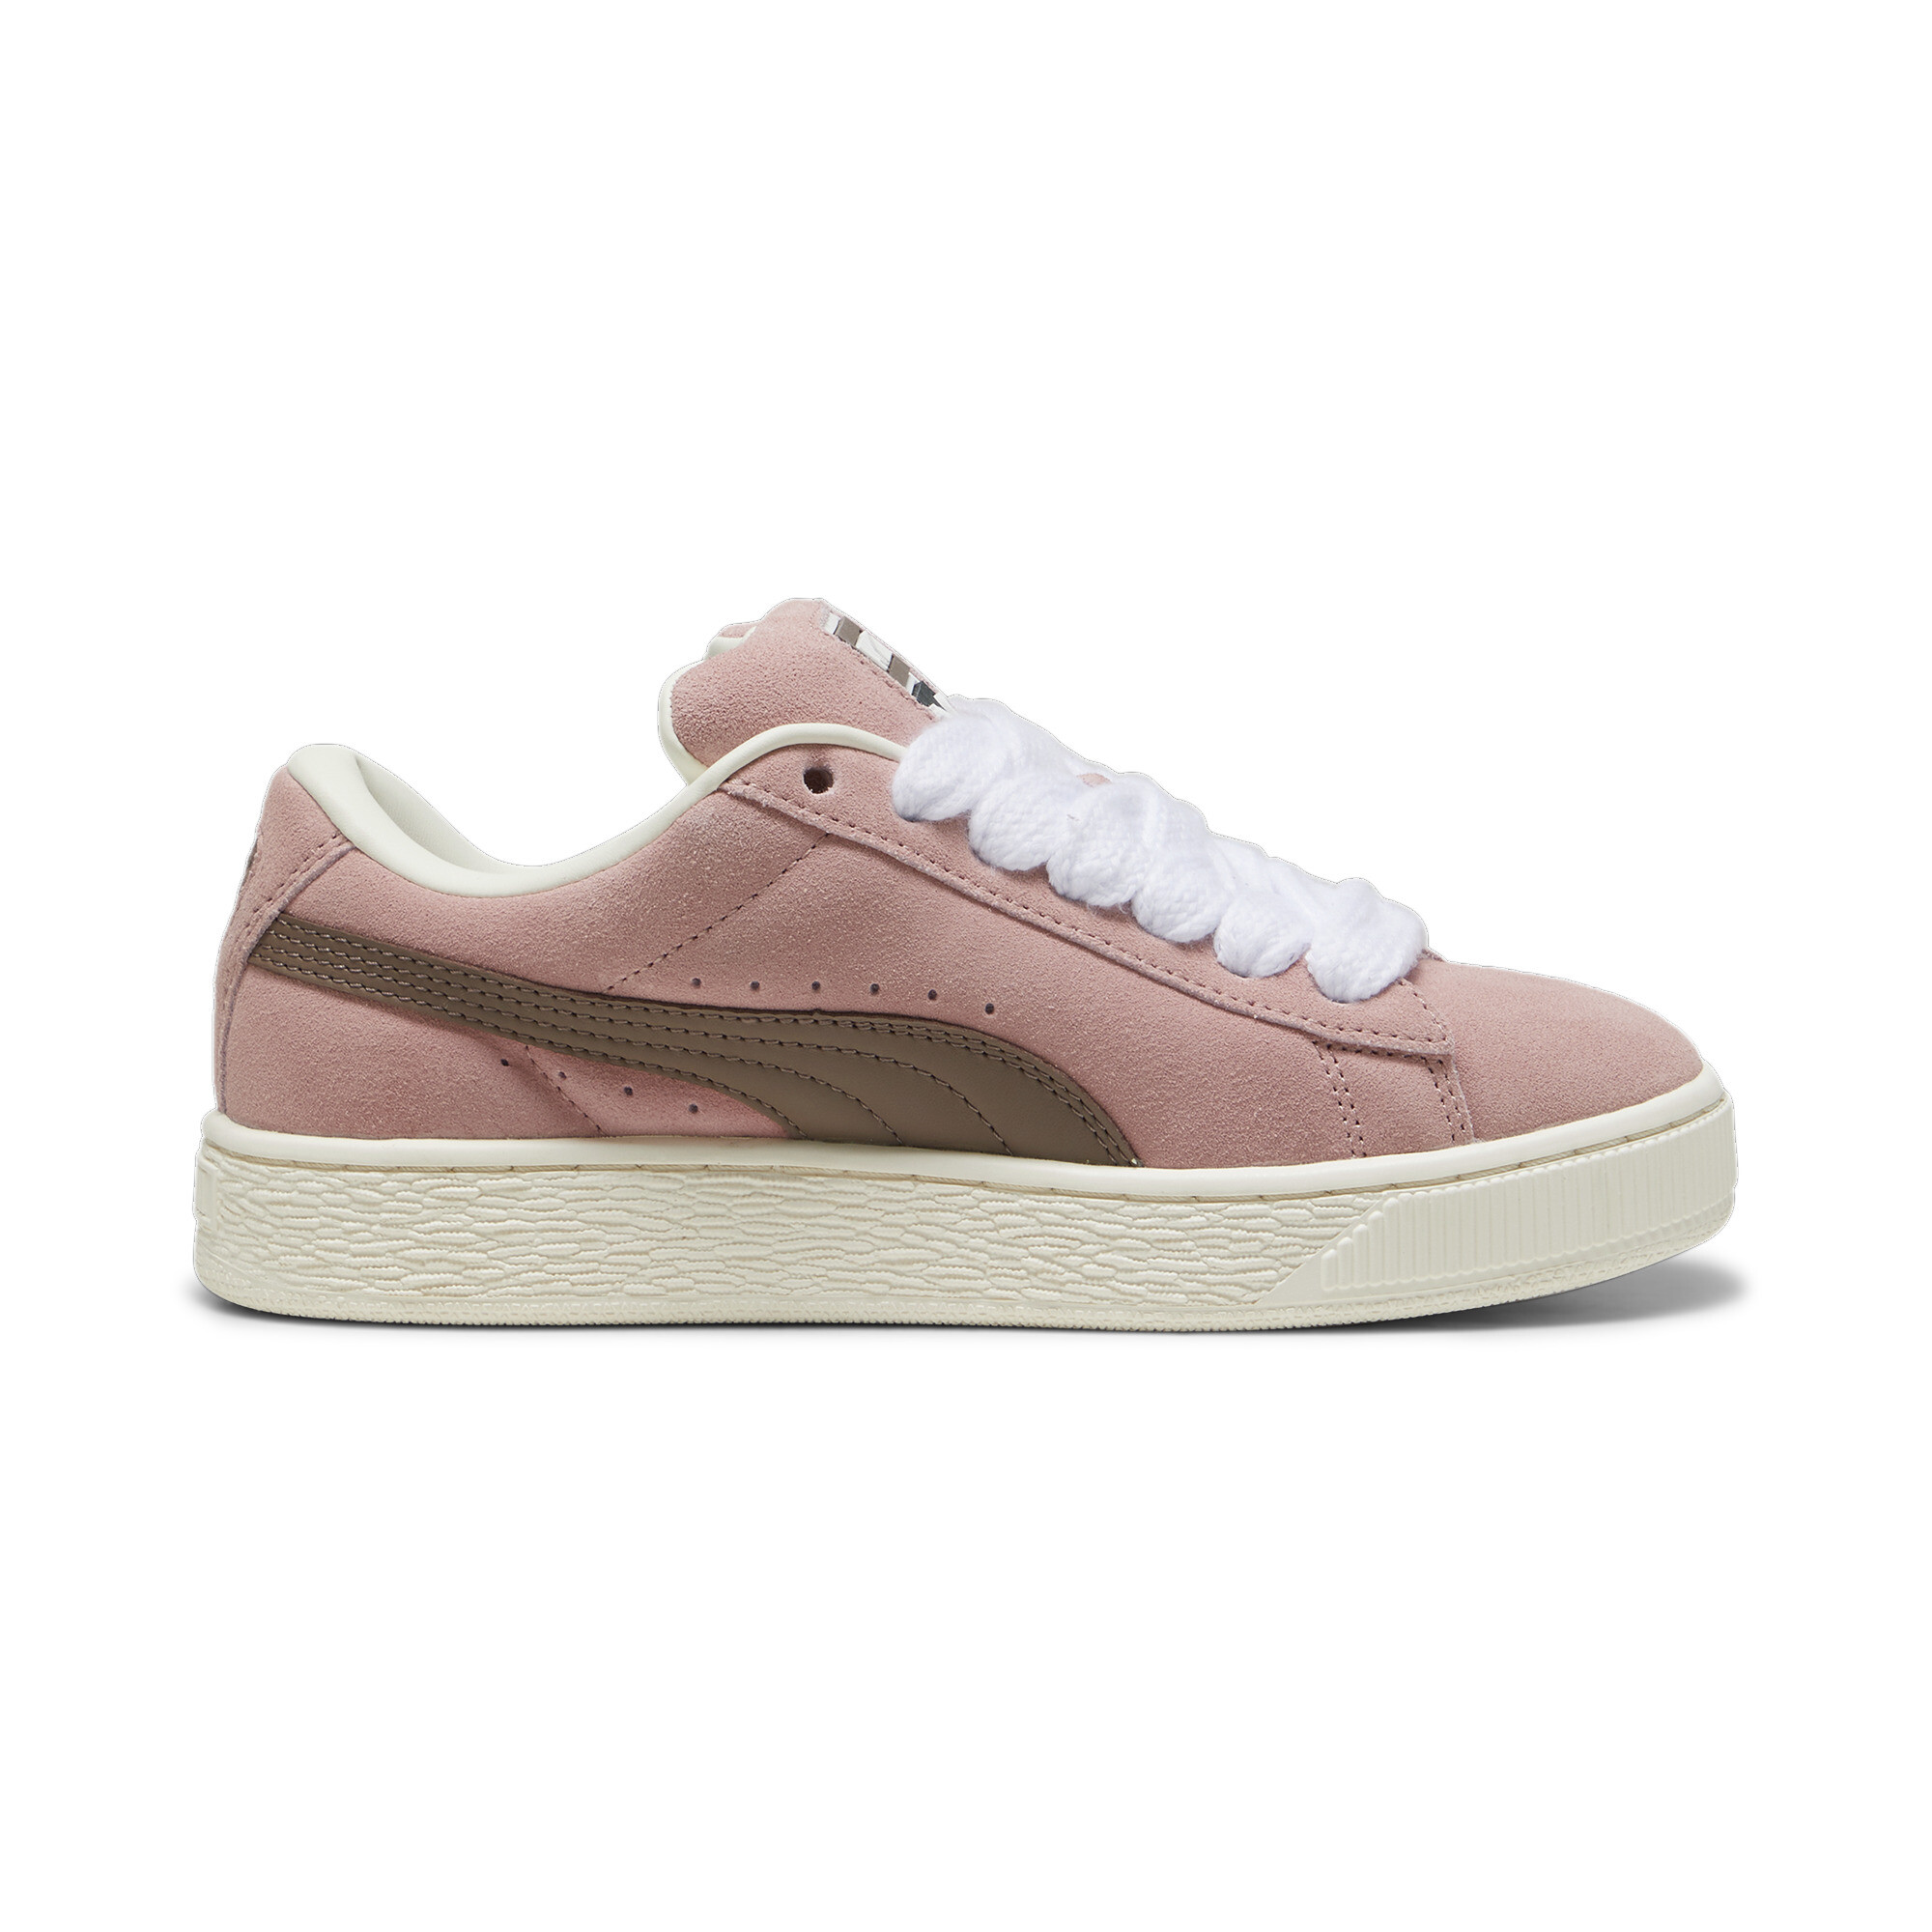 Puma Suede XL Sneakers Unisex, Pink, Size 37.5, Shoes